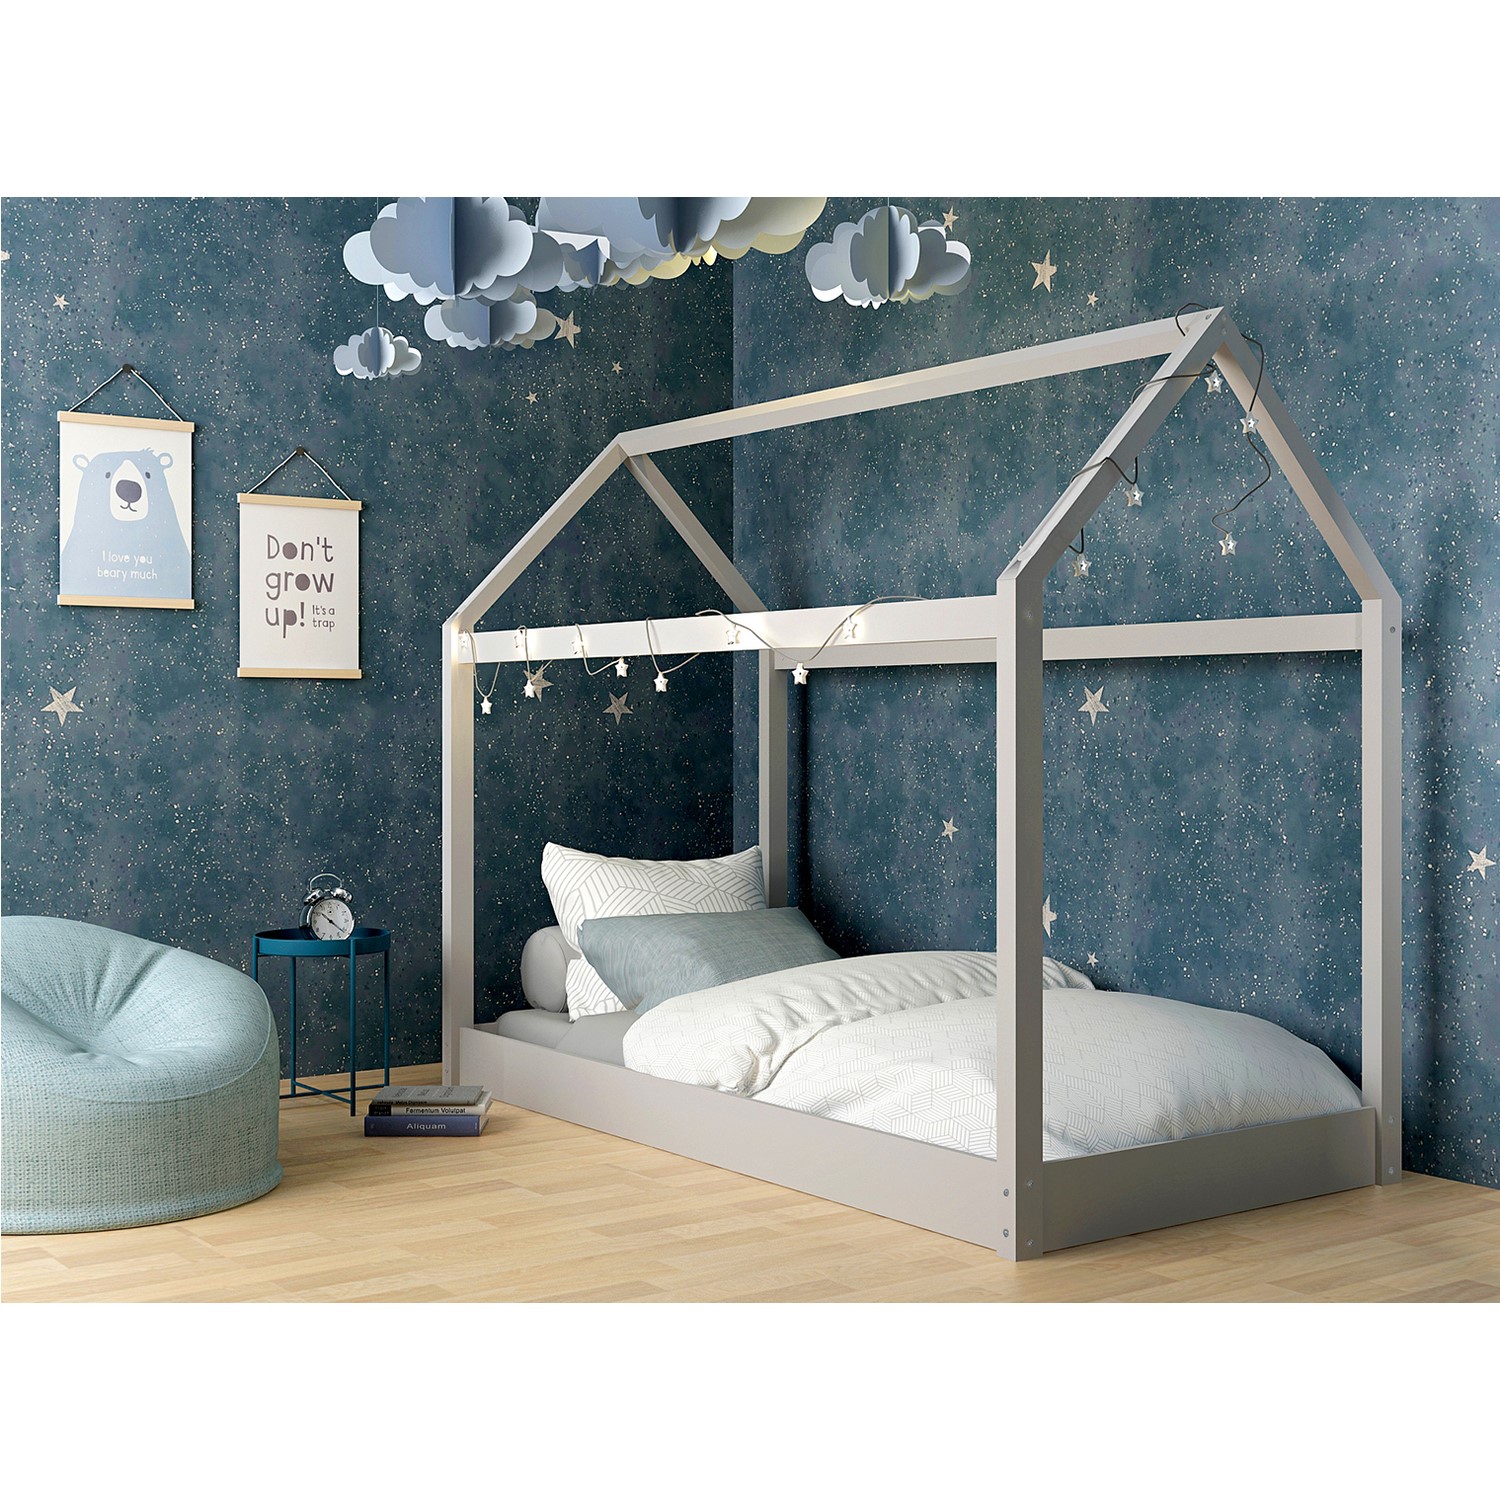 Read more about House single bed frame in grey hickory lpd